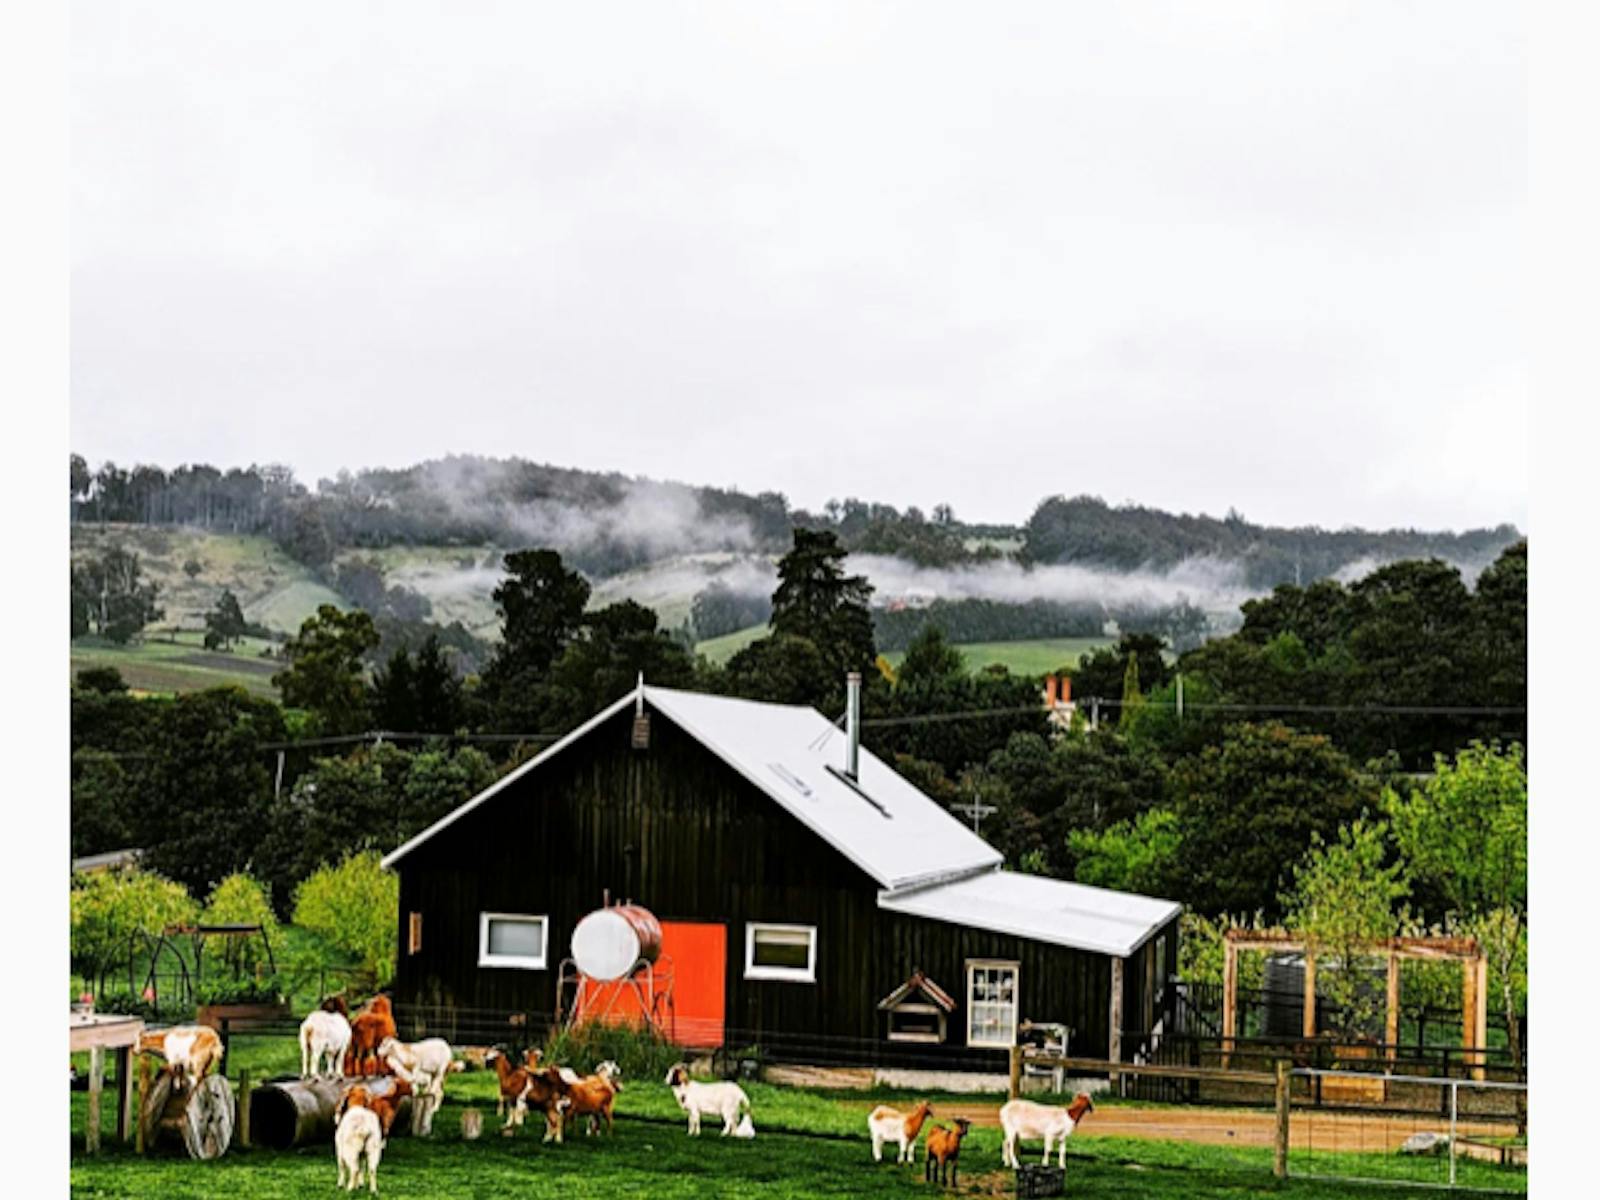 meticulously renovated  apple barn  with highland cattle, goats, alpacas, chickens and sheep